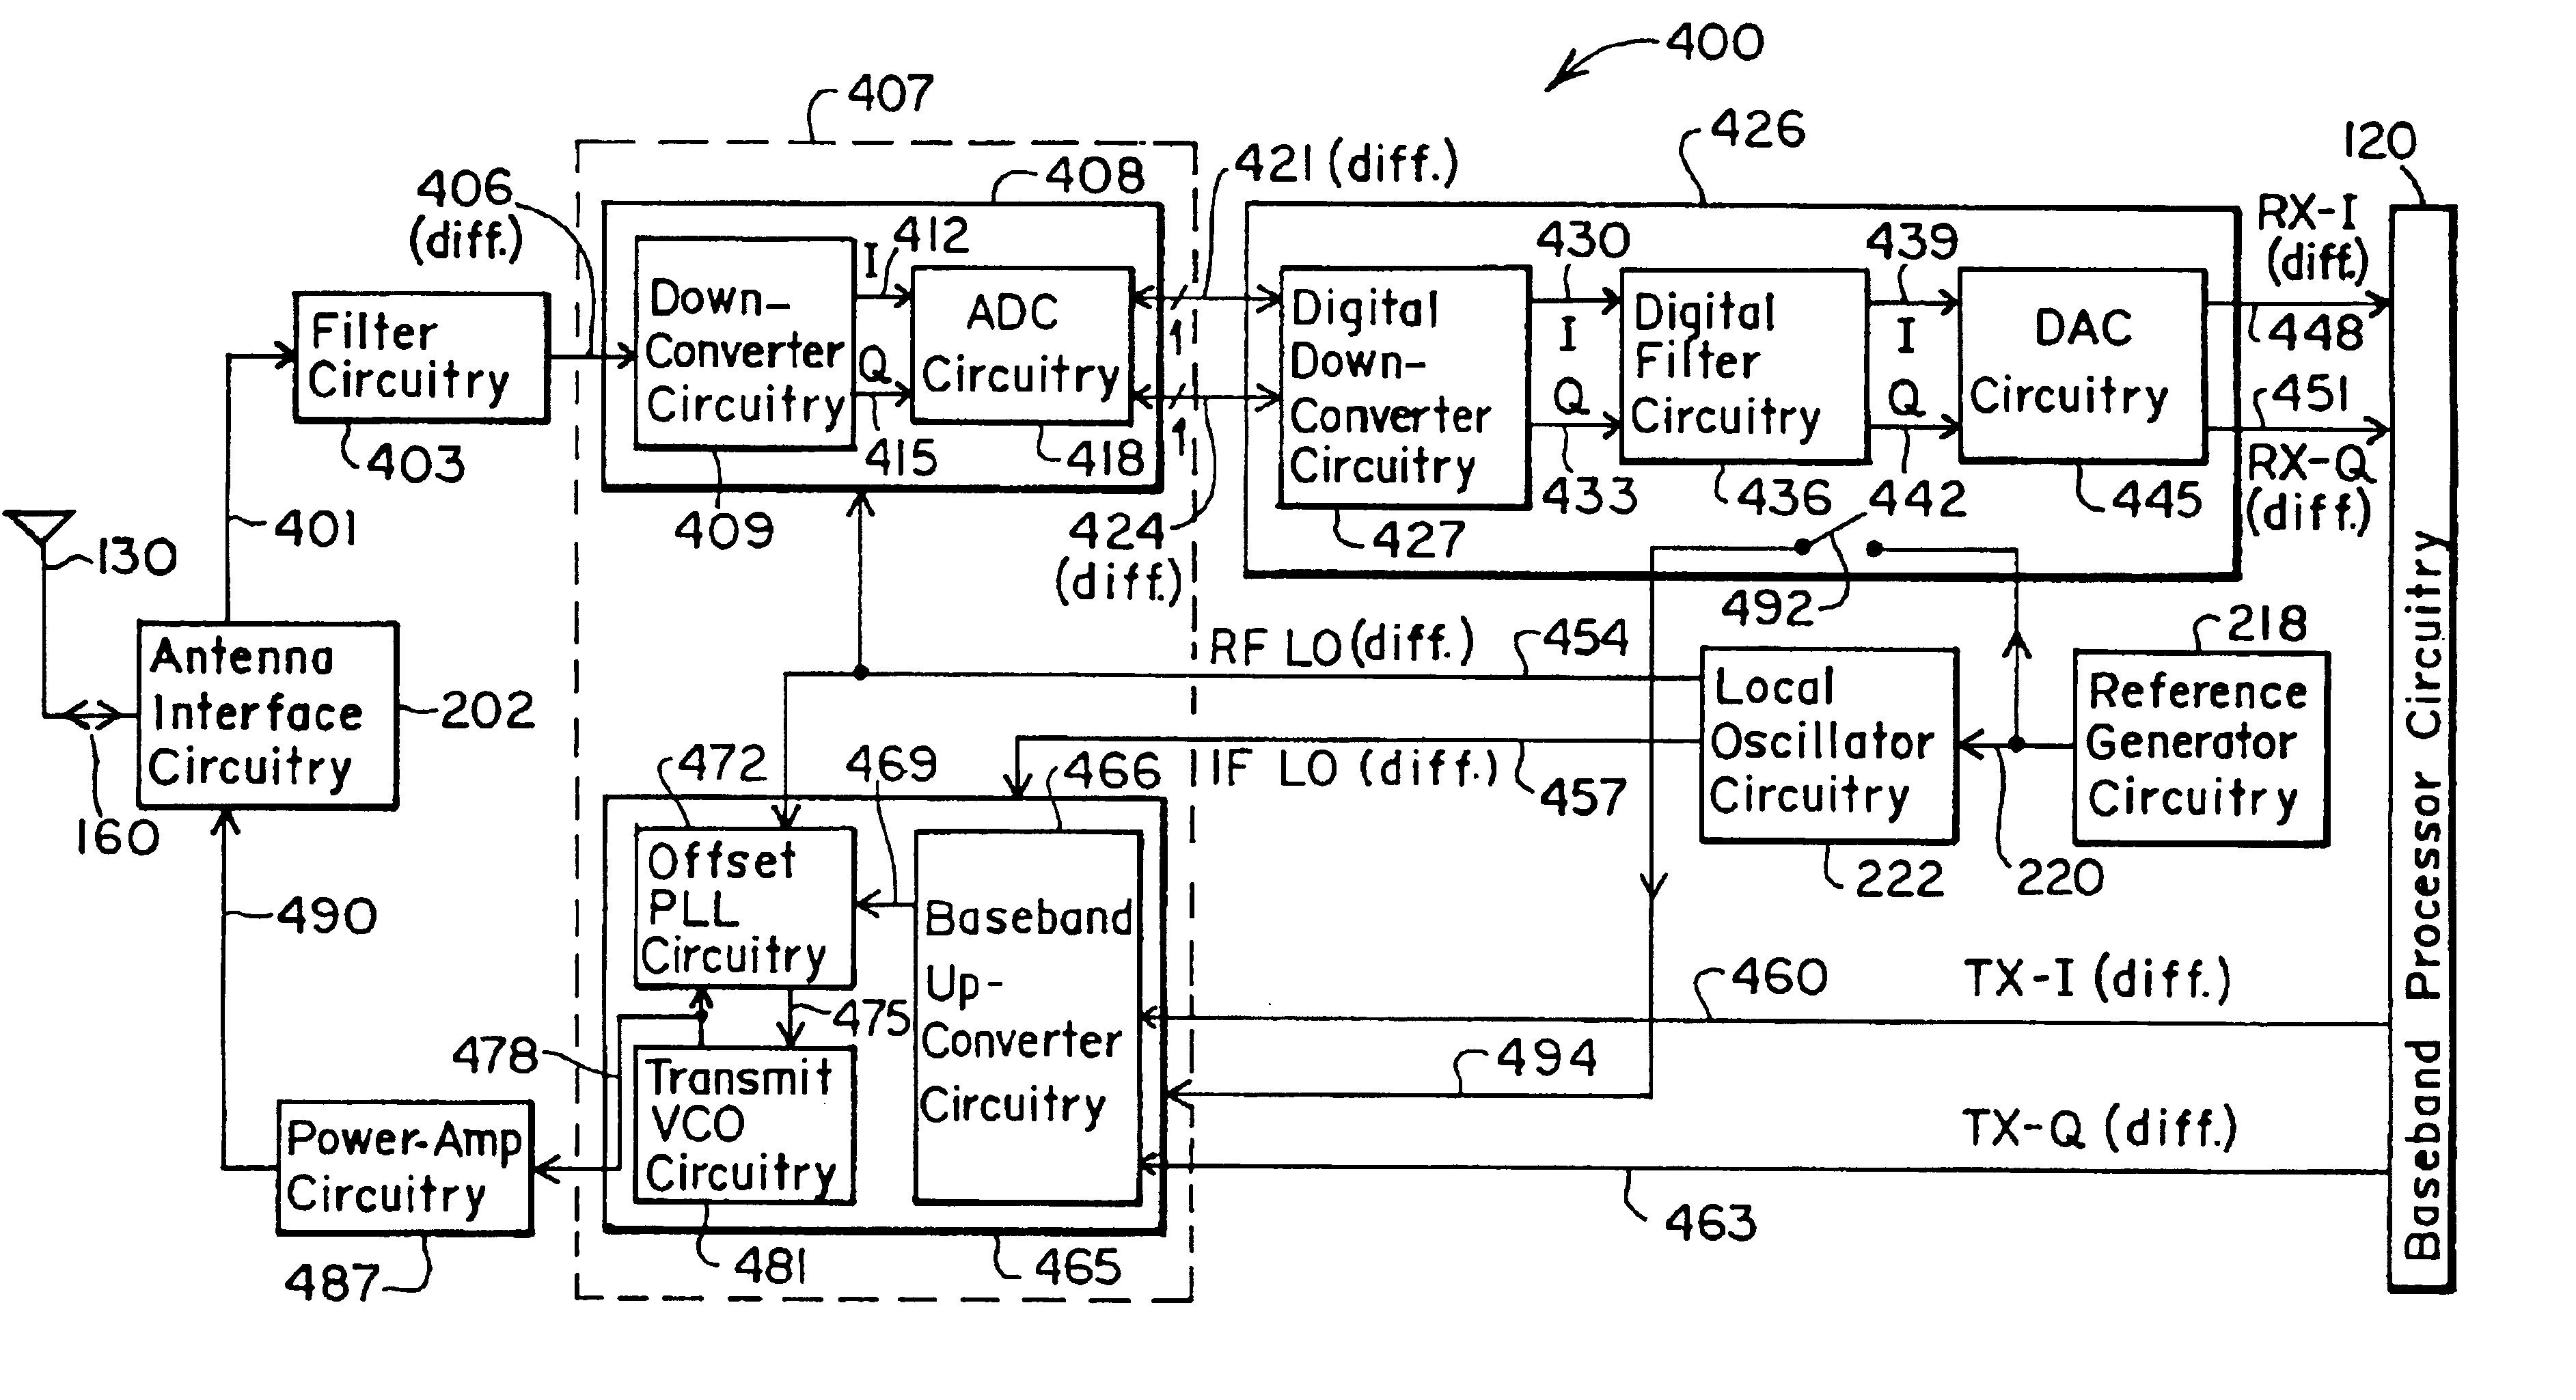 Digital architecture for radio-frequency apparatus and associated methods